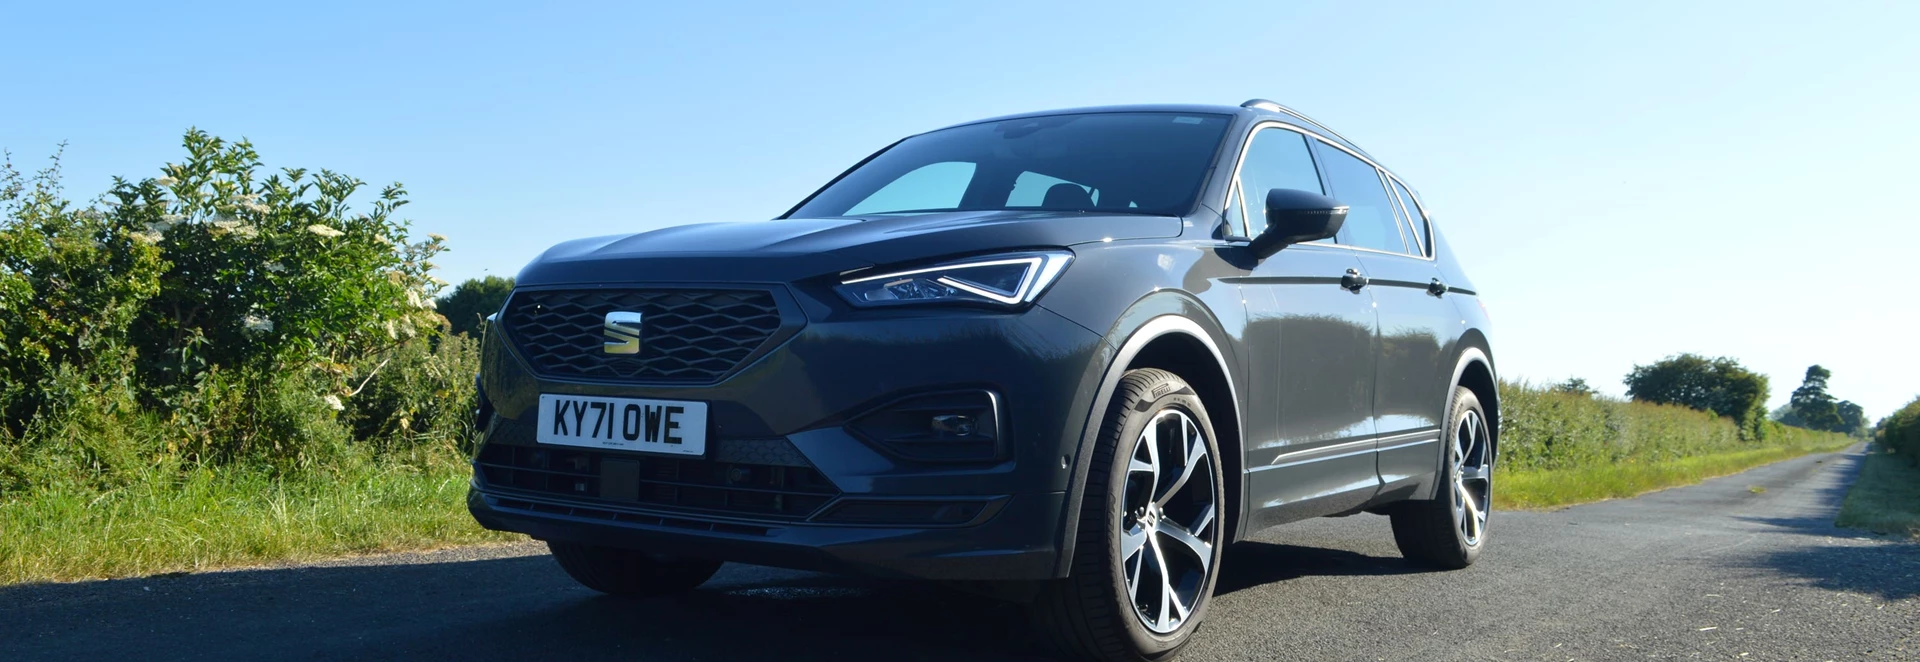 Seat Tarraco: 5 reasons to consider this SUV 